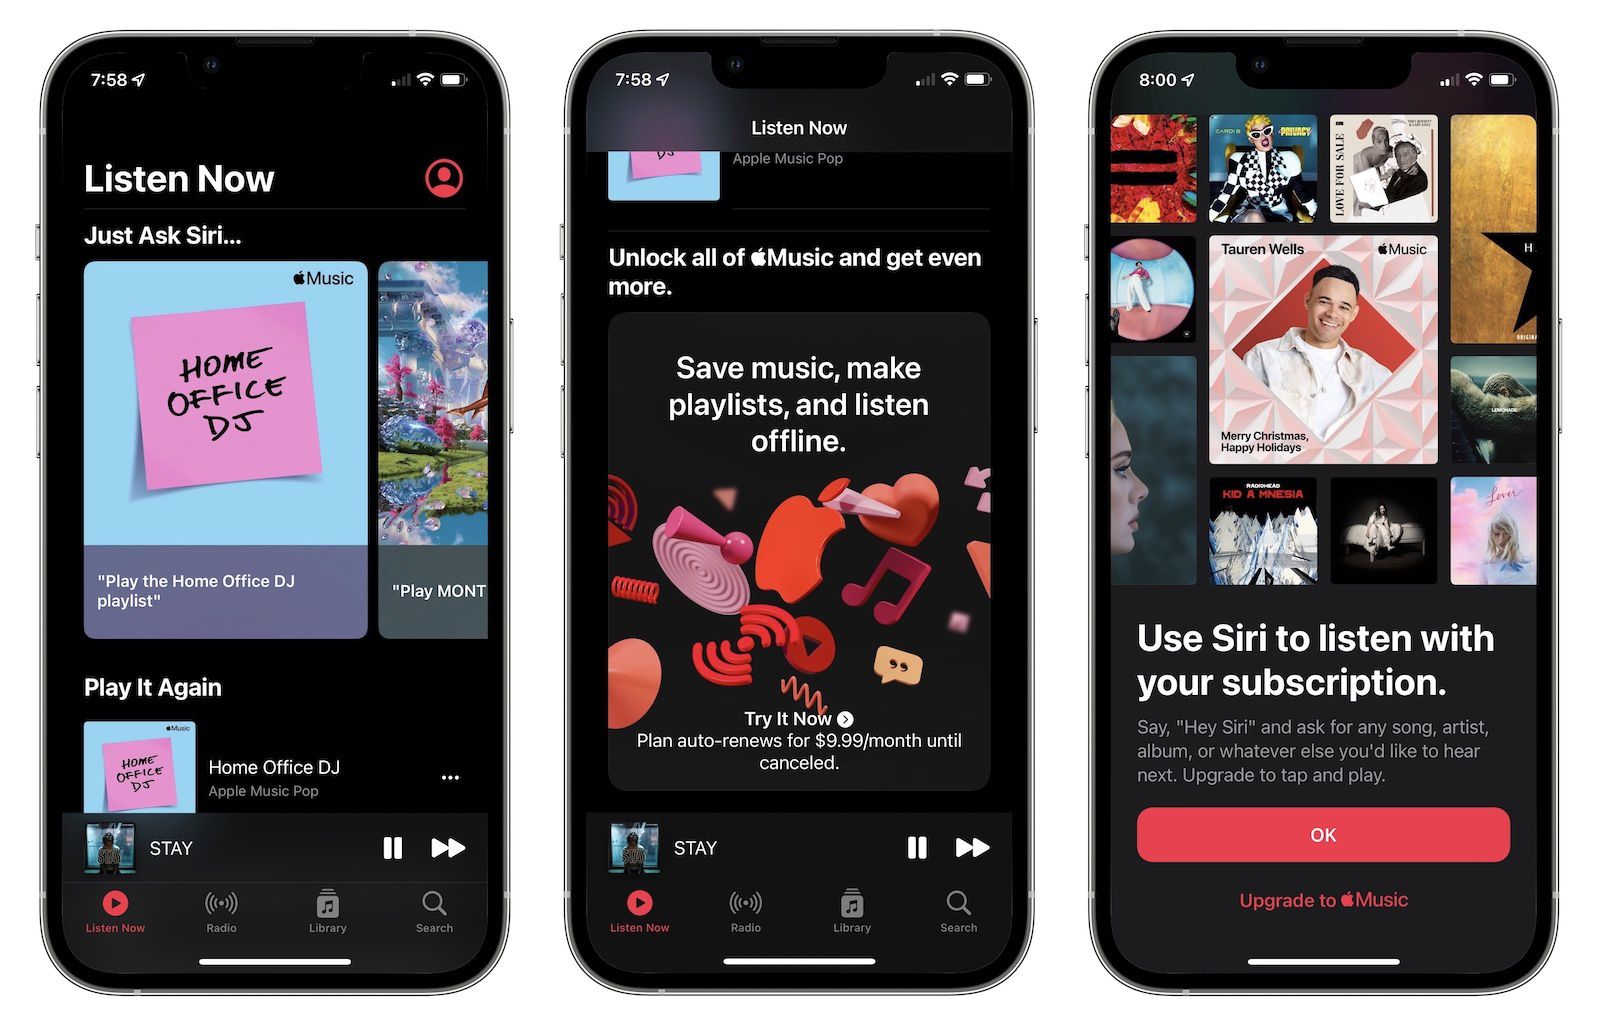 Here's a First Look at Apple Music's Voice Plan Launching With iOS 15.2